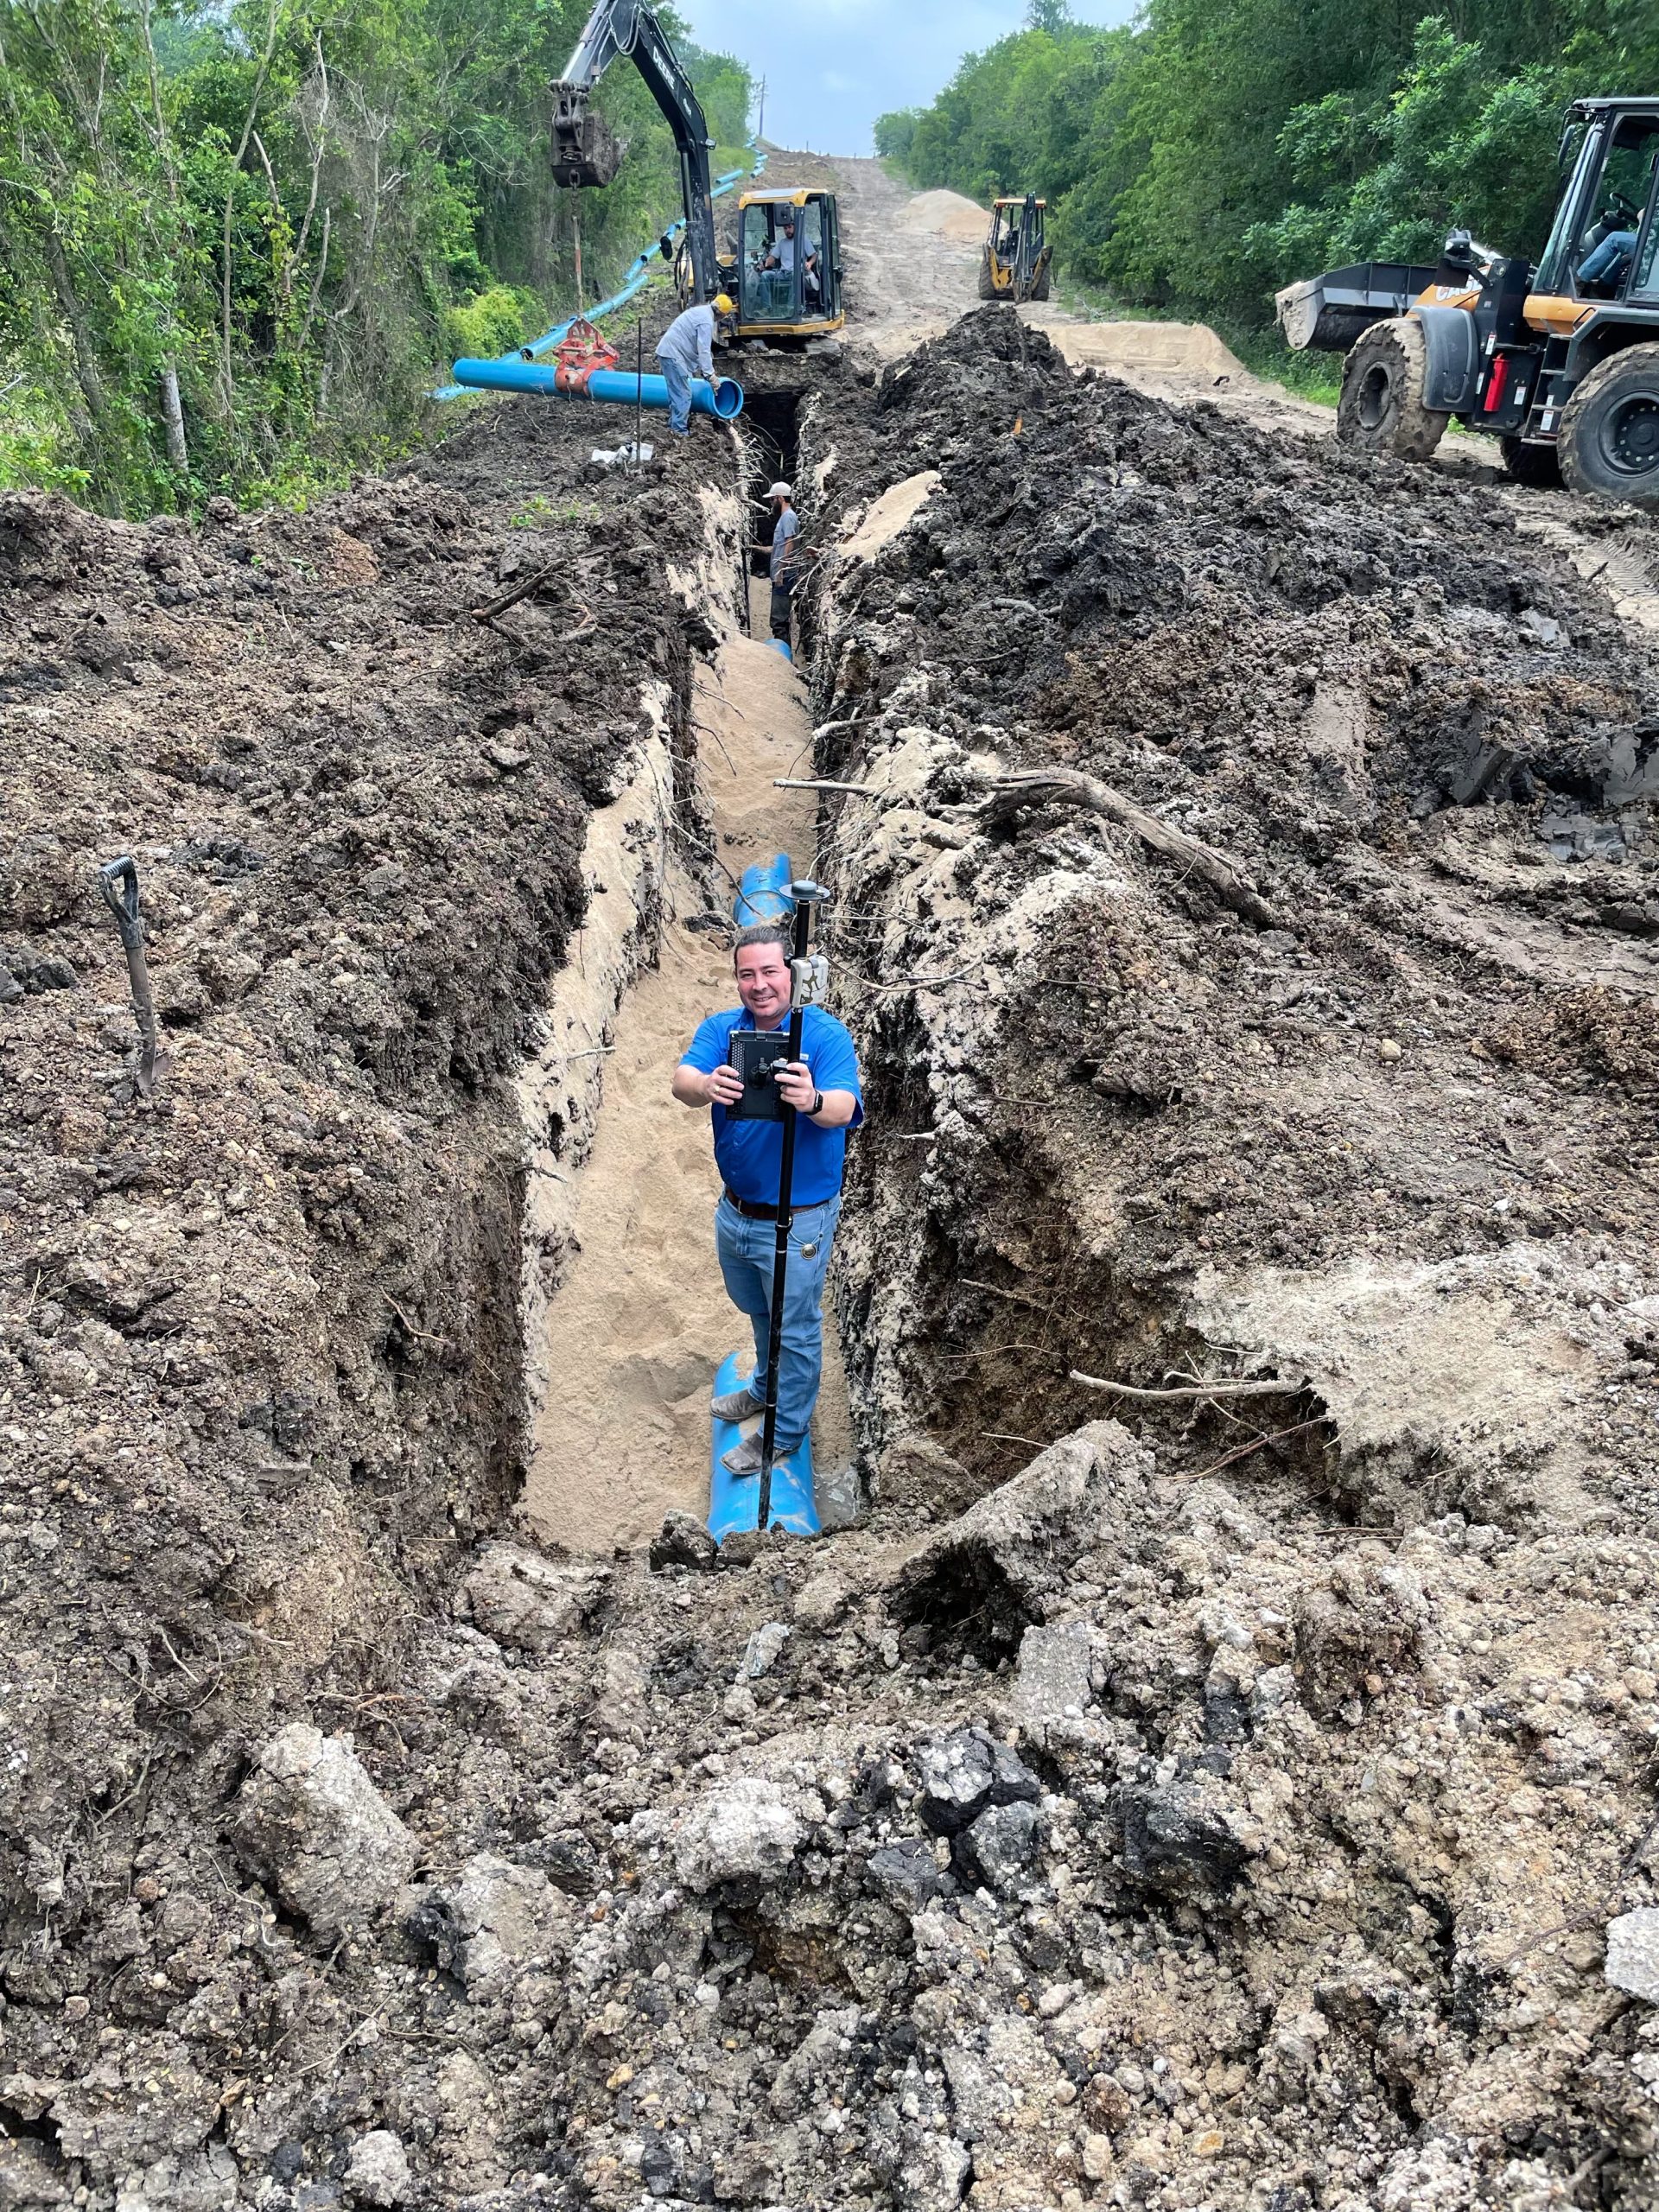 Dave Babicki performs data collection on a water main installation using Eos Arrow GNSS with Esri ArcGIS Field Maps for GPS / GIS asset collection